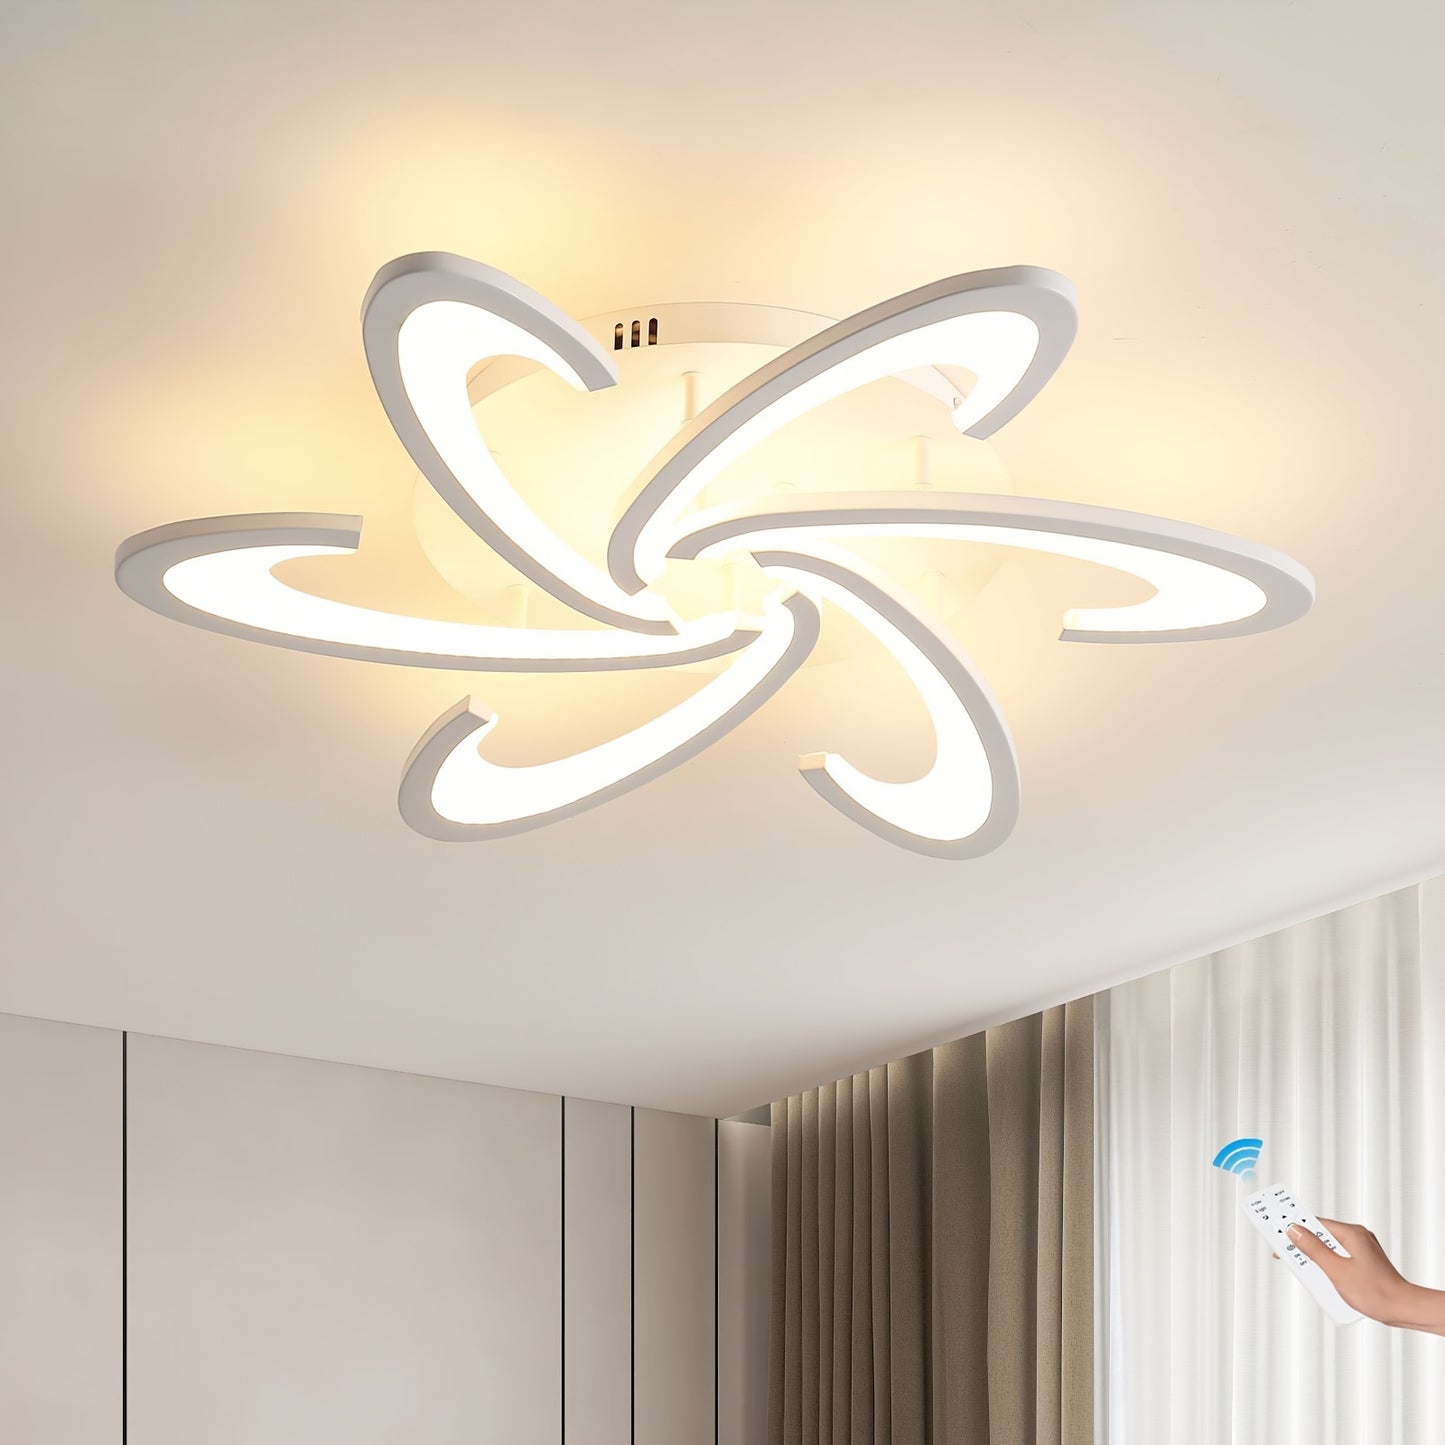 1pc LED Modern Ceiling Light Dimmable With Remote Control, Creative Flower Shape Design Ceiling Lamp, Metal Acrylic Modern Petals Chandelier Light Fixture For Living Room Restaurant Bedroom Corridor